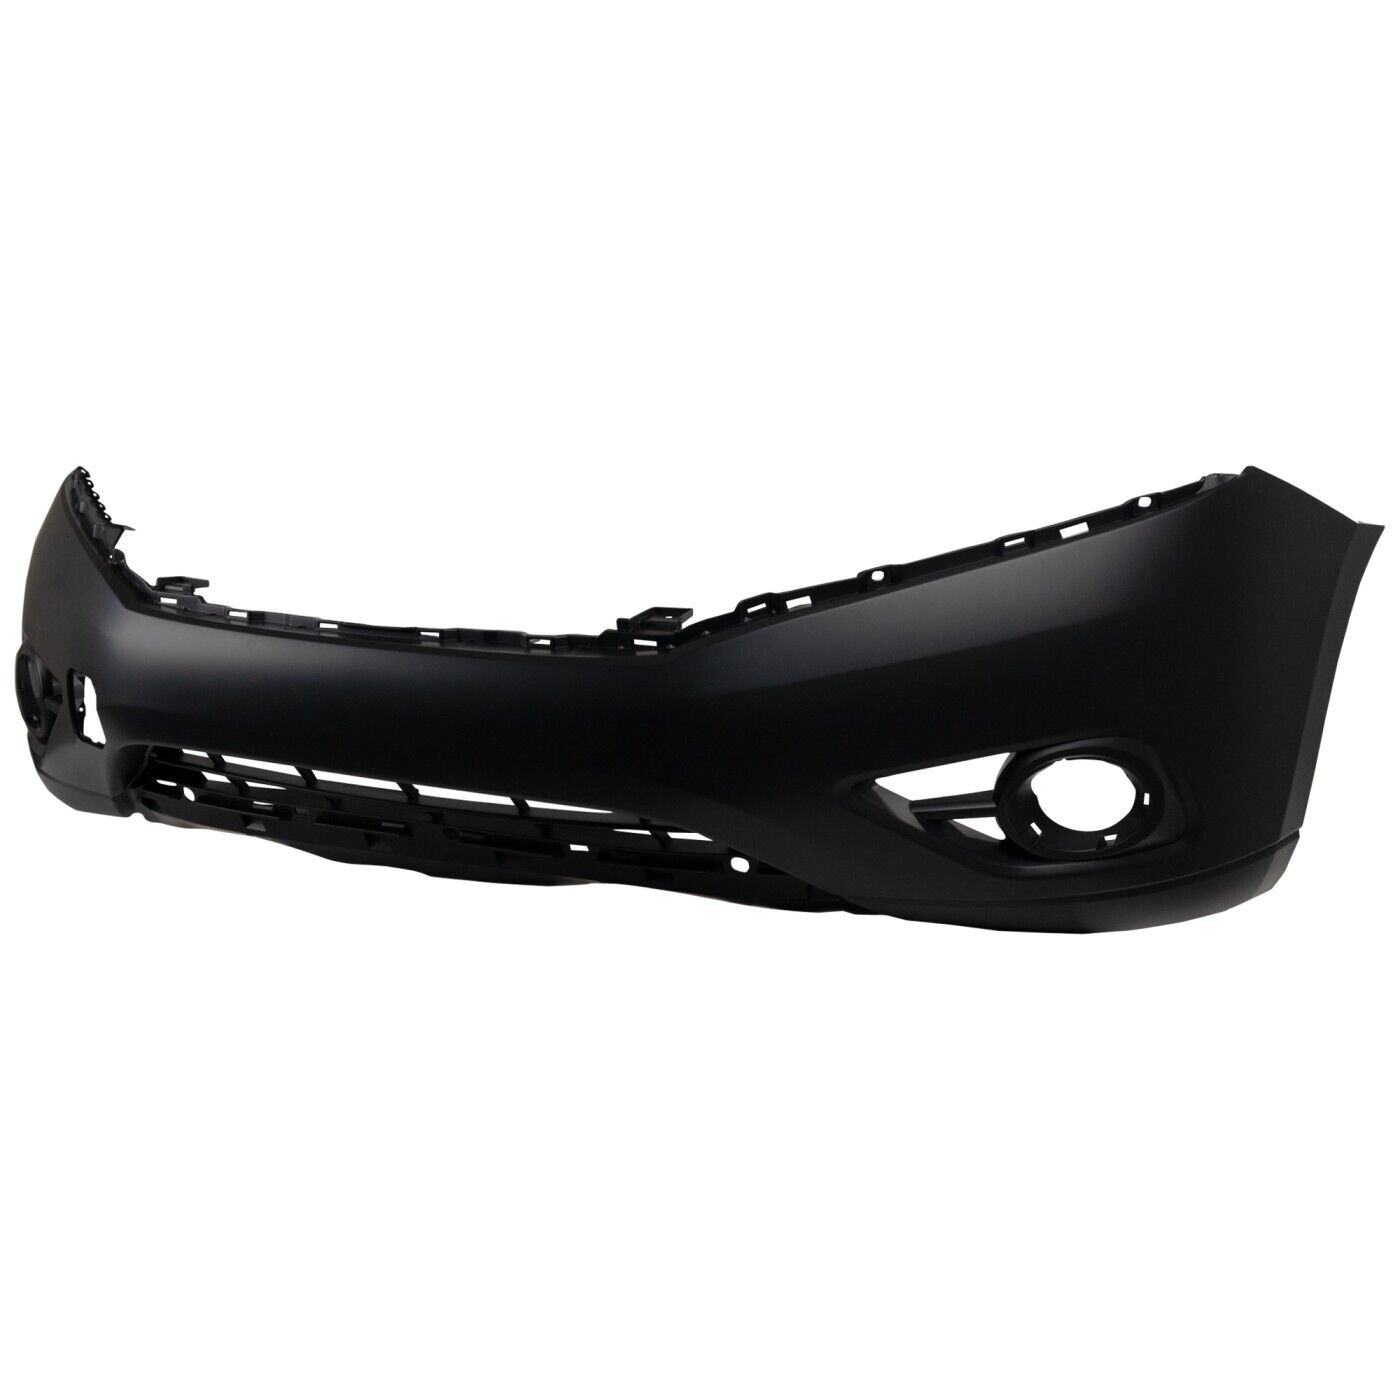 Front Bumper Cover For 2013-2016 Nissan Pathfinder Primed Top With Tow Hook Hole